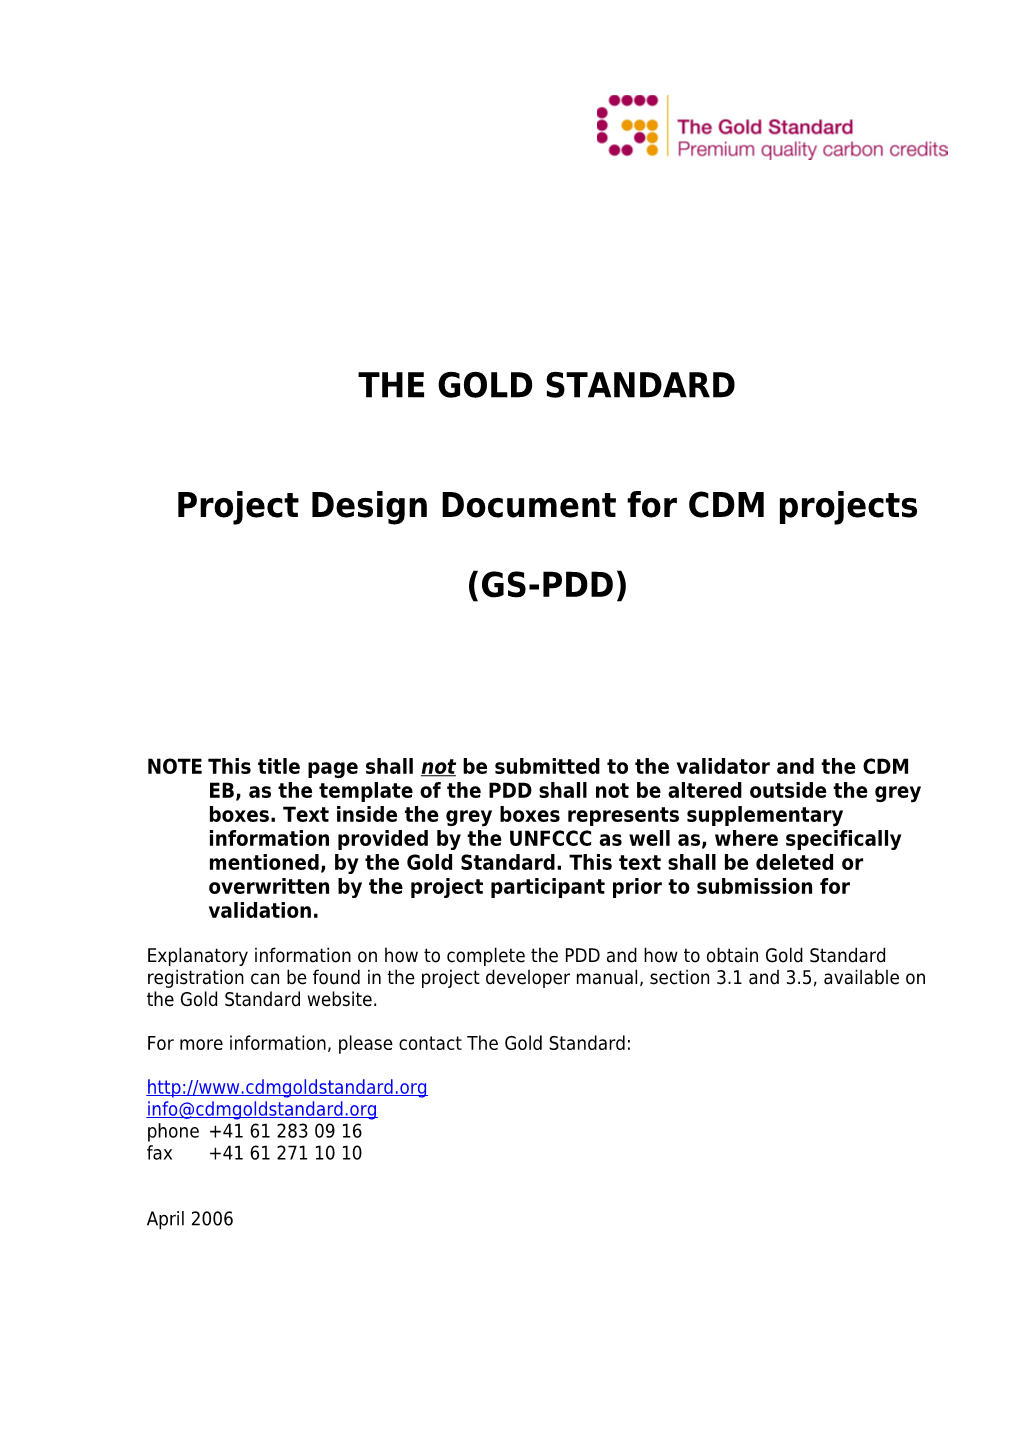 Project Design Document for CDM Projects